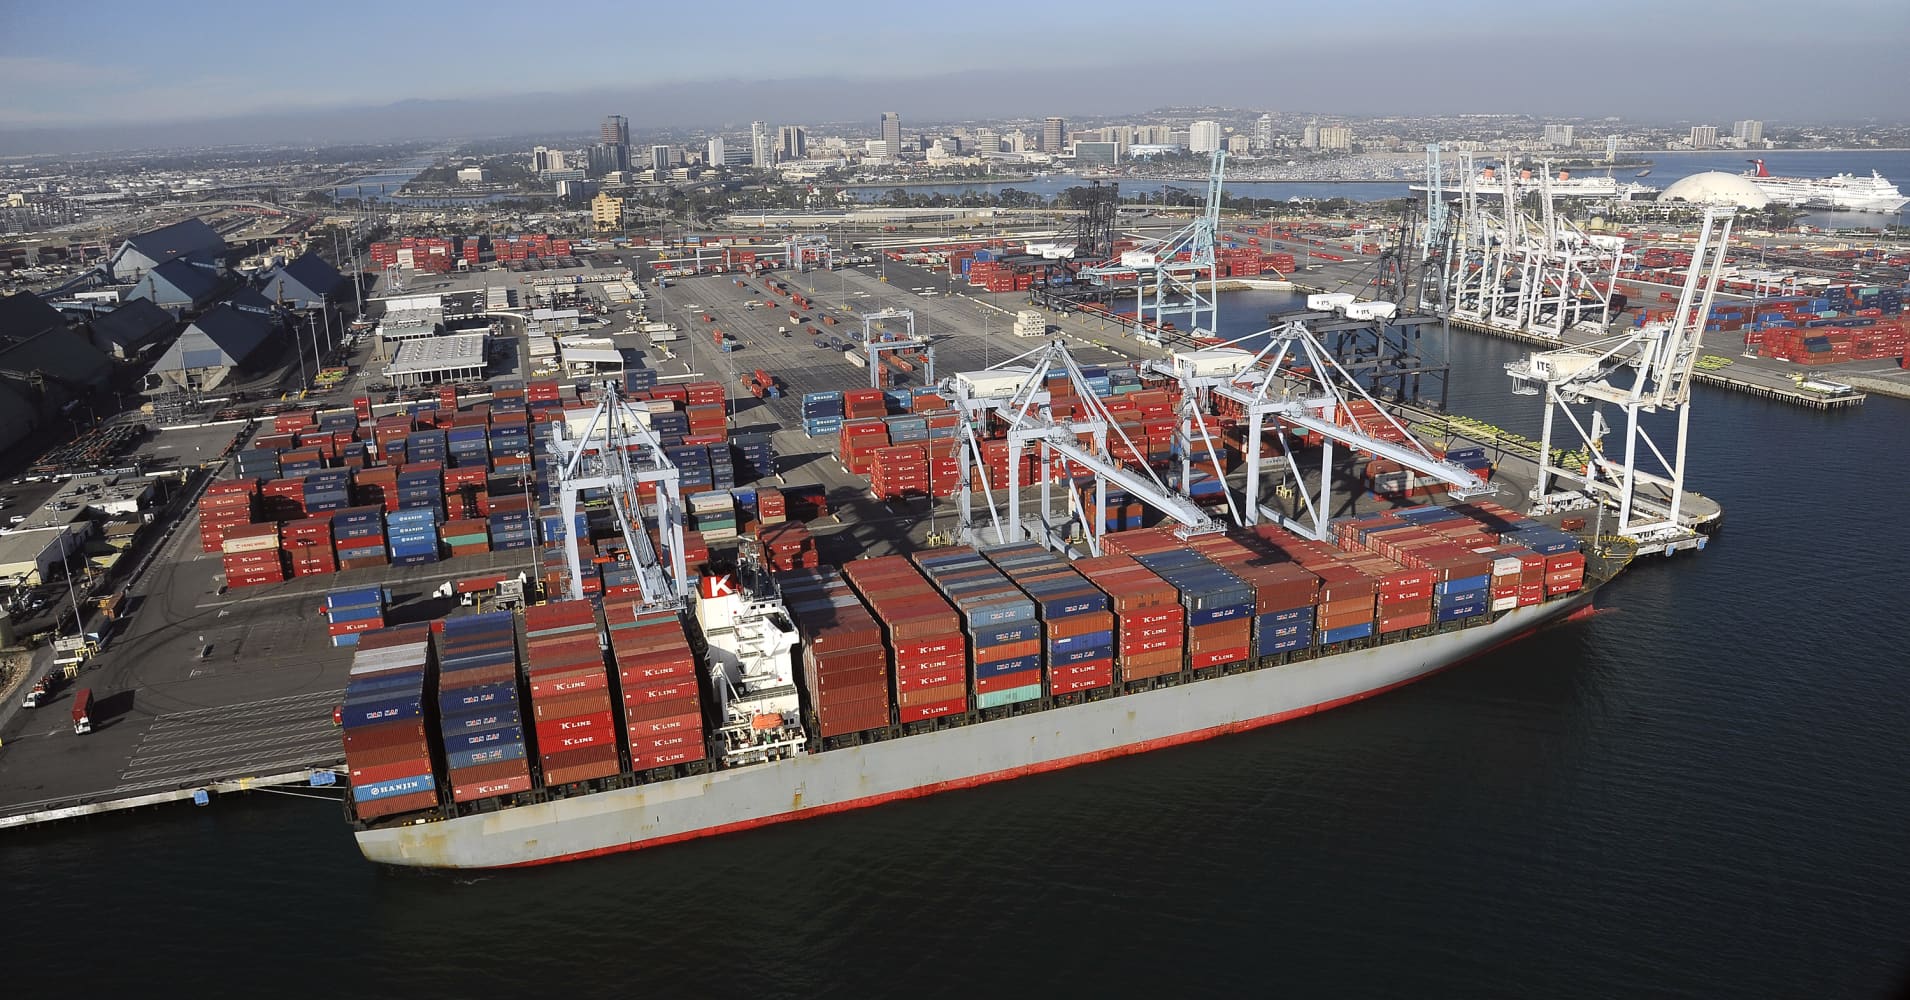 US ports are on the front line of Trump's trade war – and they're bracing for higher China tariffs